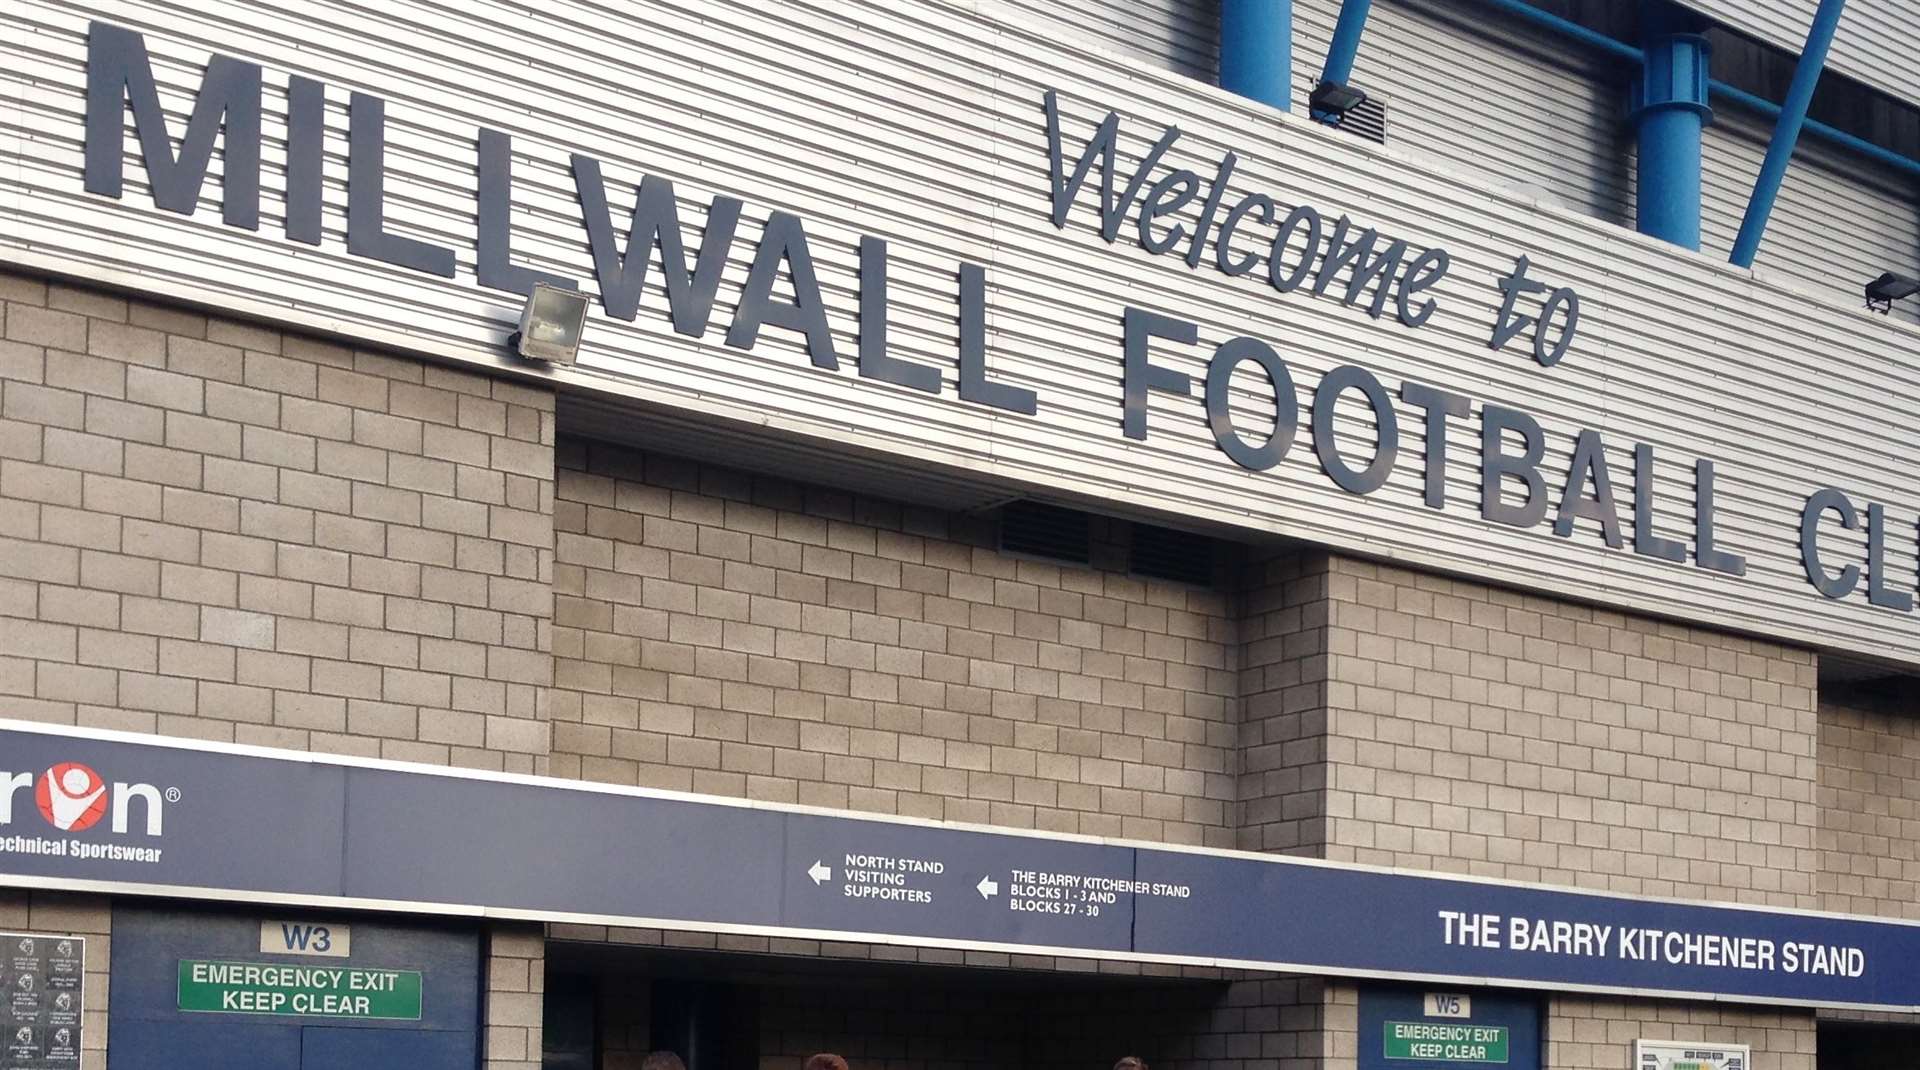 Millwall FC's home ground is 19 miles away in south London